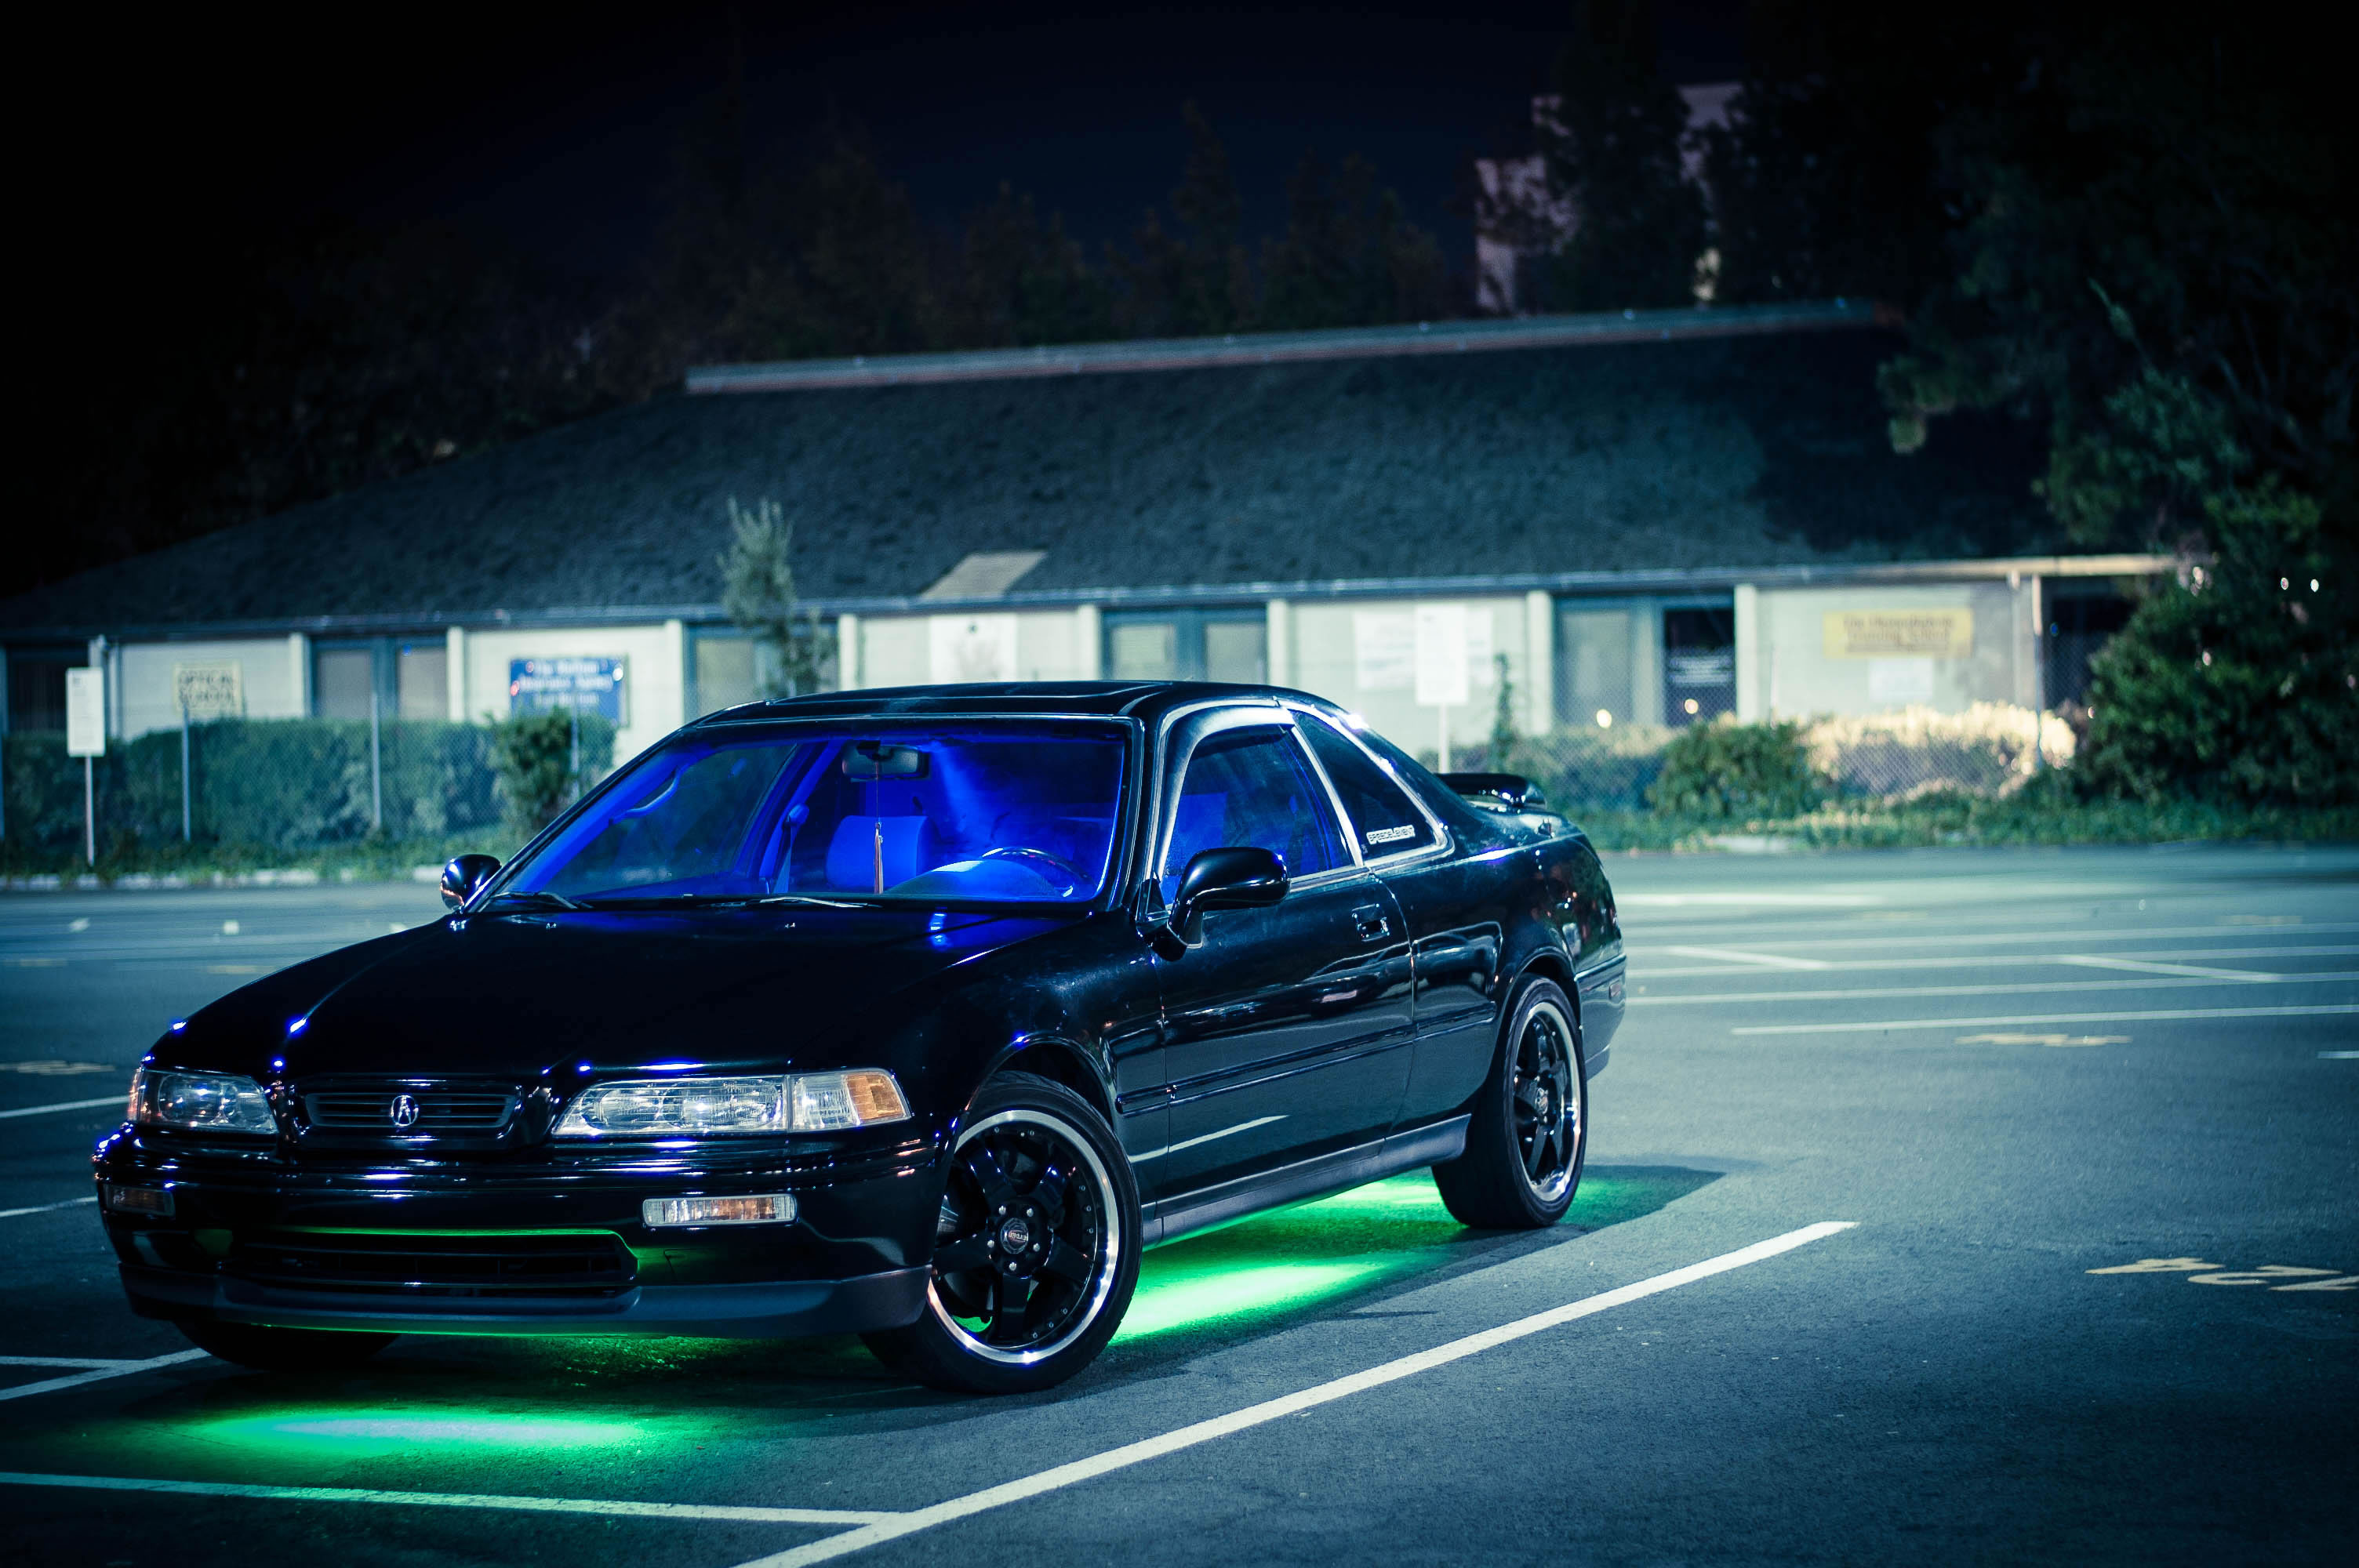 Why is Underglow Illegal? Neon Underglow Laws